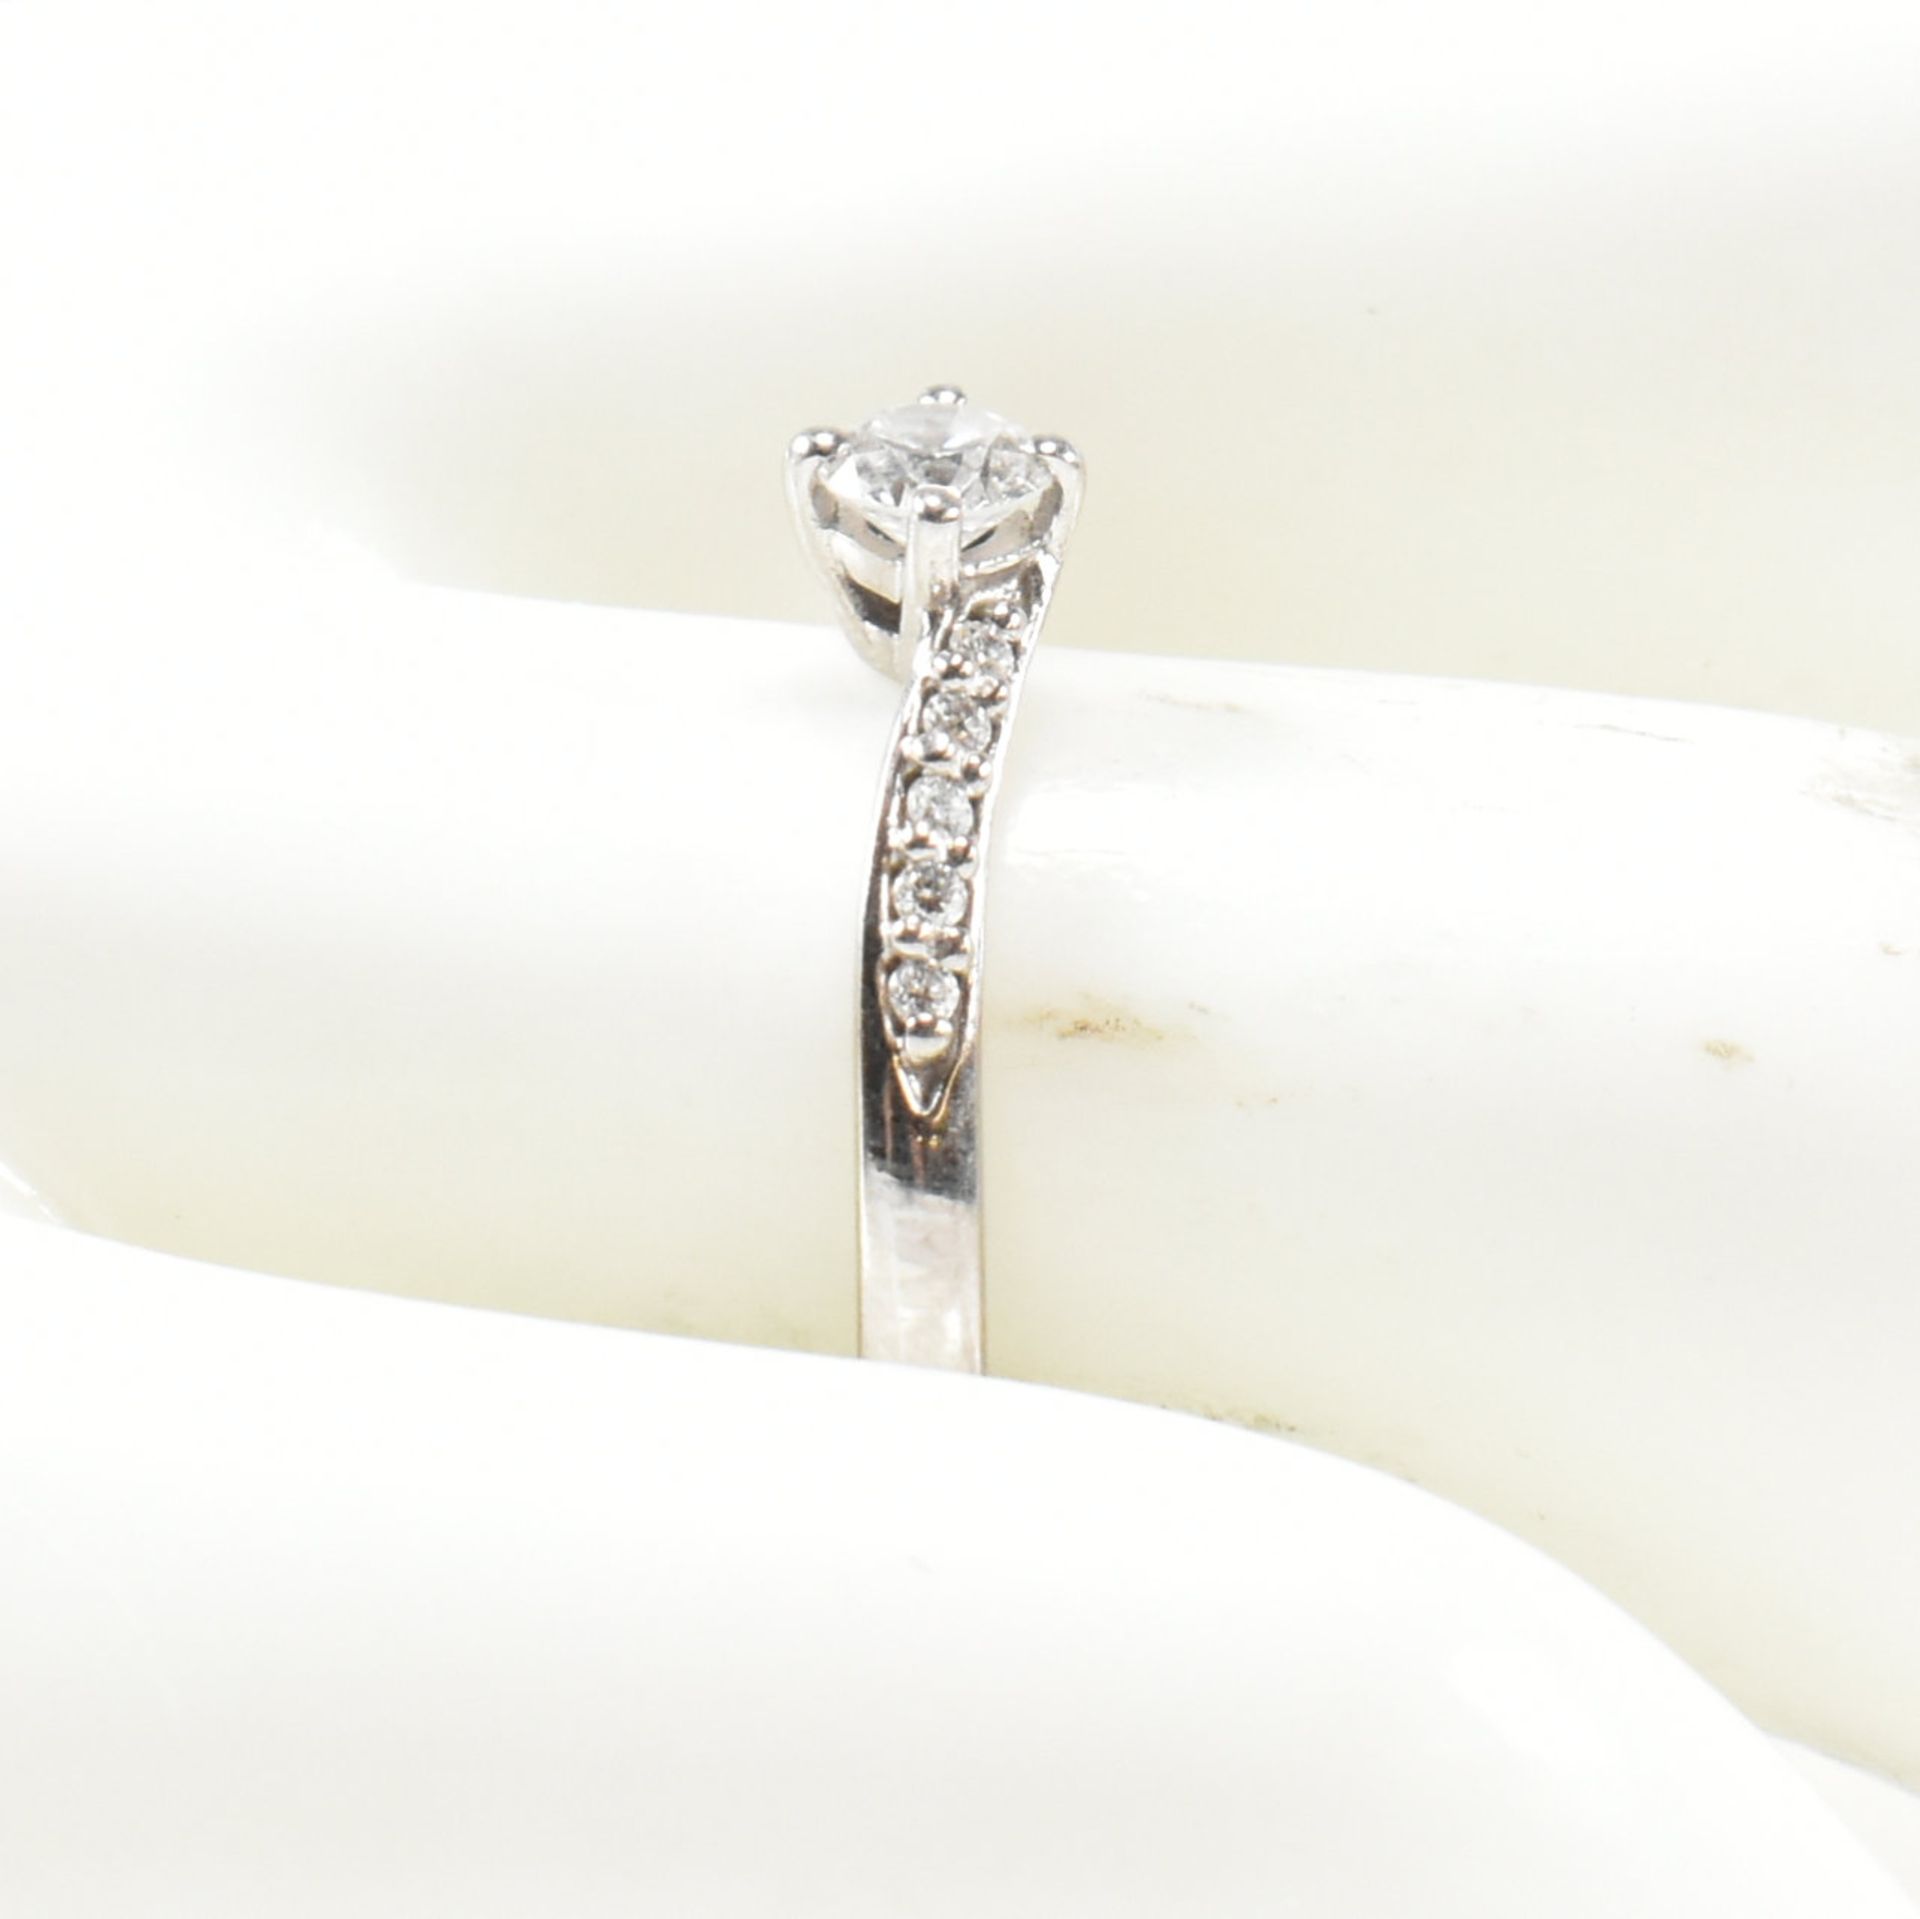 HALLMARKED 18CT WHITE GOLD & DIAMOND CROSSOVER RING - Image 9 of 9